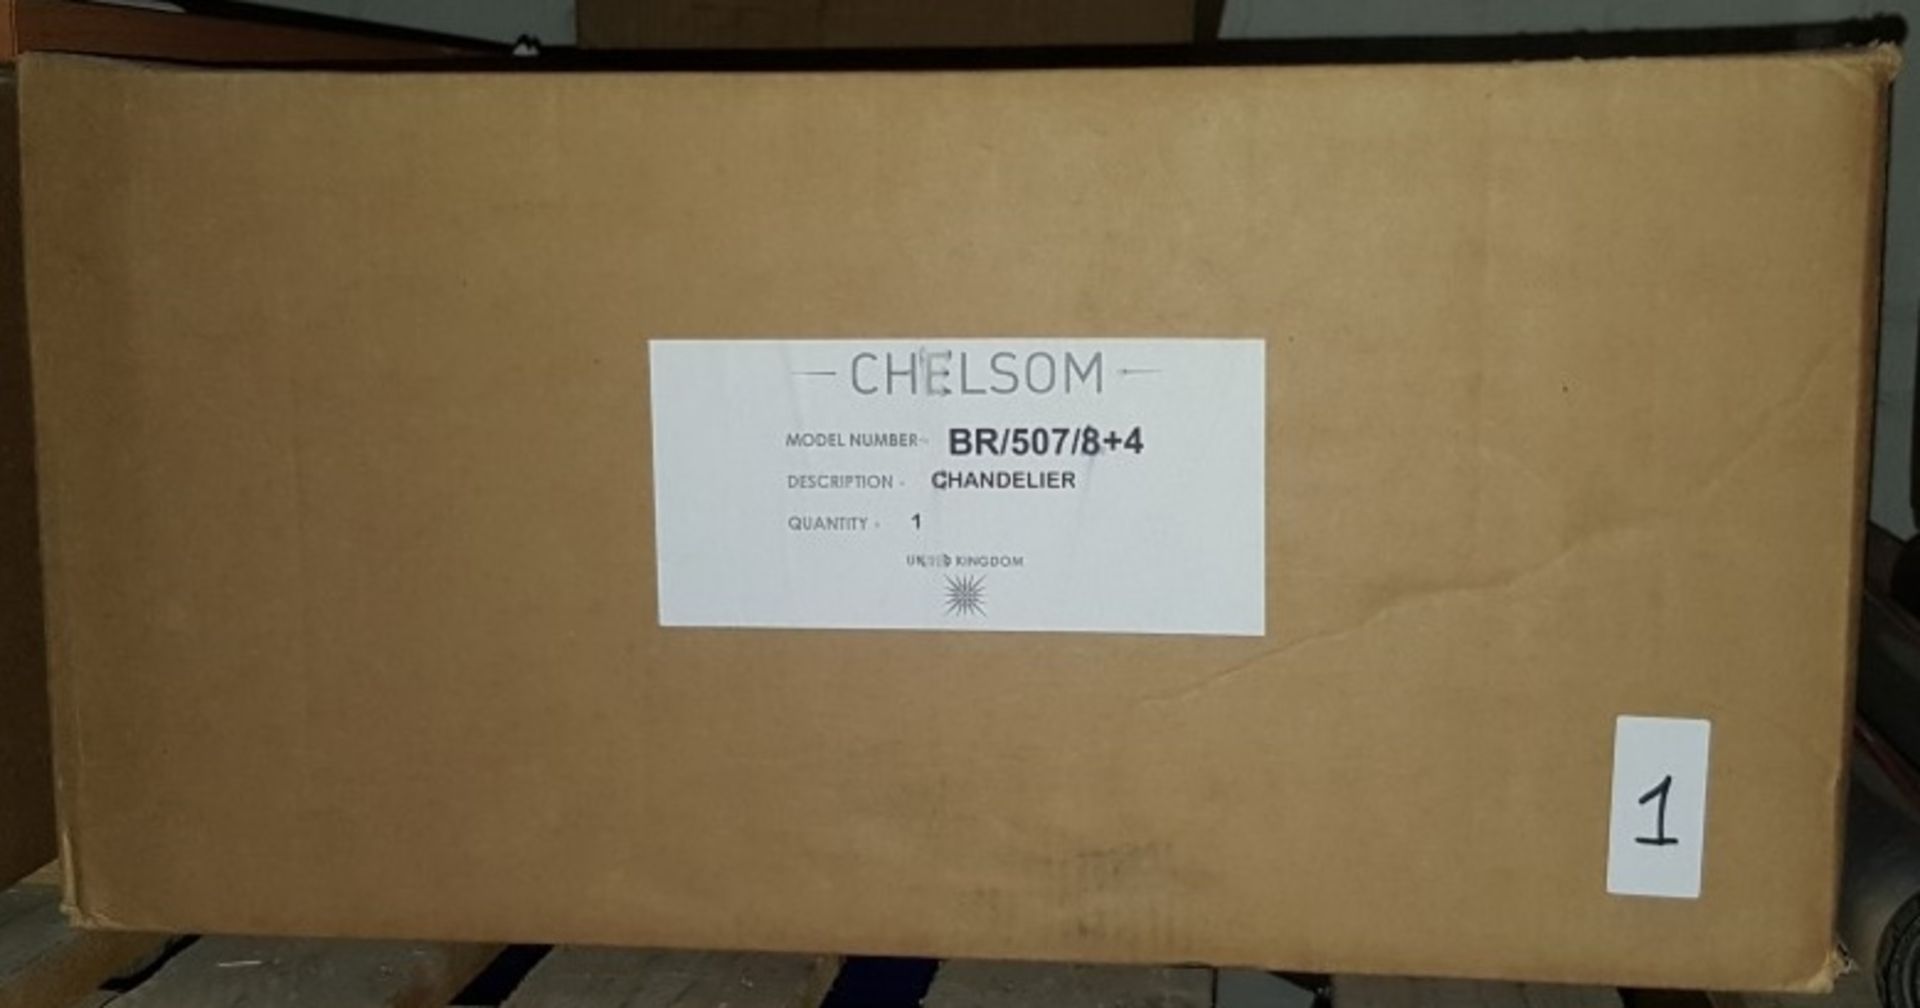 1 x New In Box Chelsom Ballroom Сhandelier BR/507/8+4 - CL001 - REF287/A31 - Location: Altrincham - Image 3 of 3